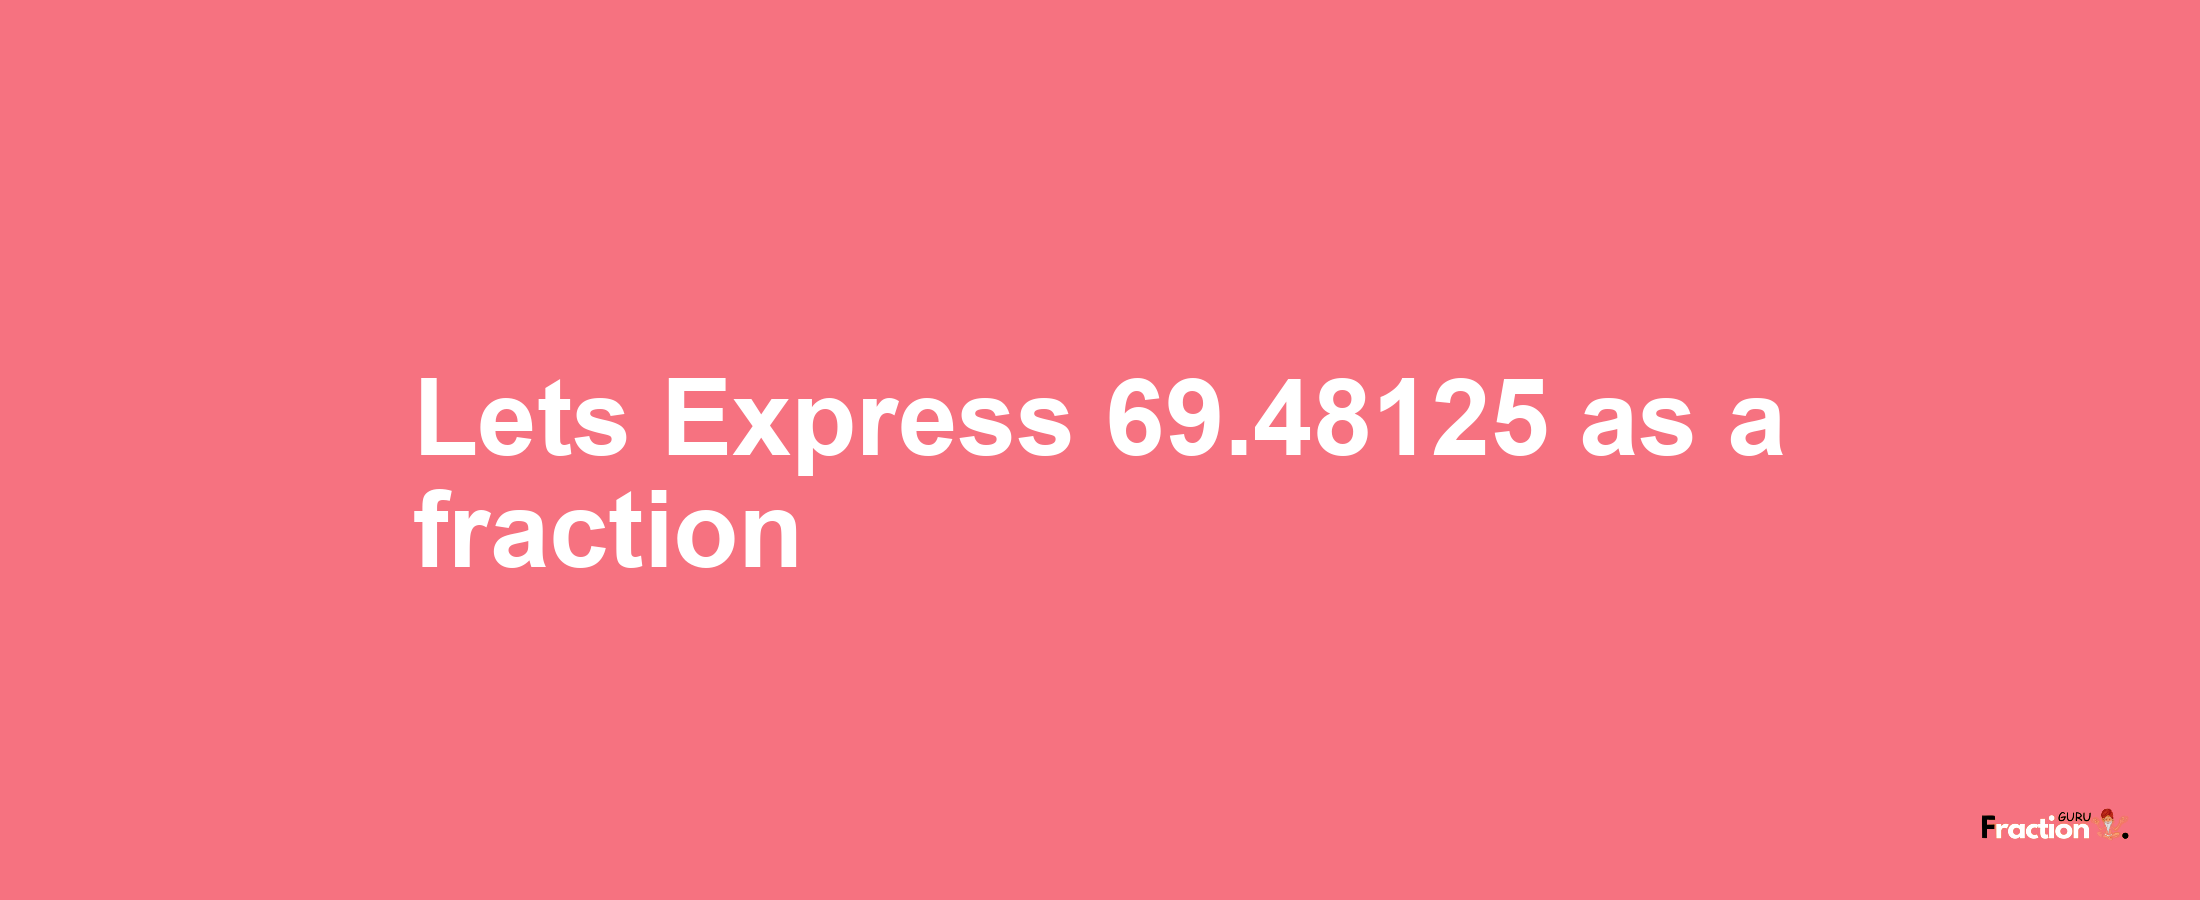 Lets Express 69.48125 as afraction